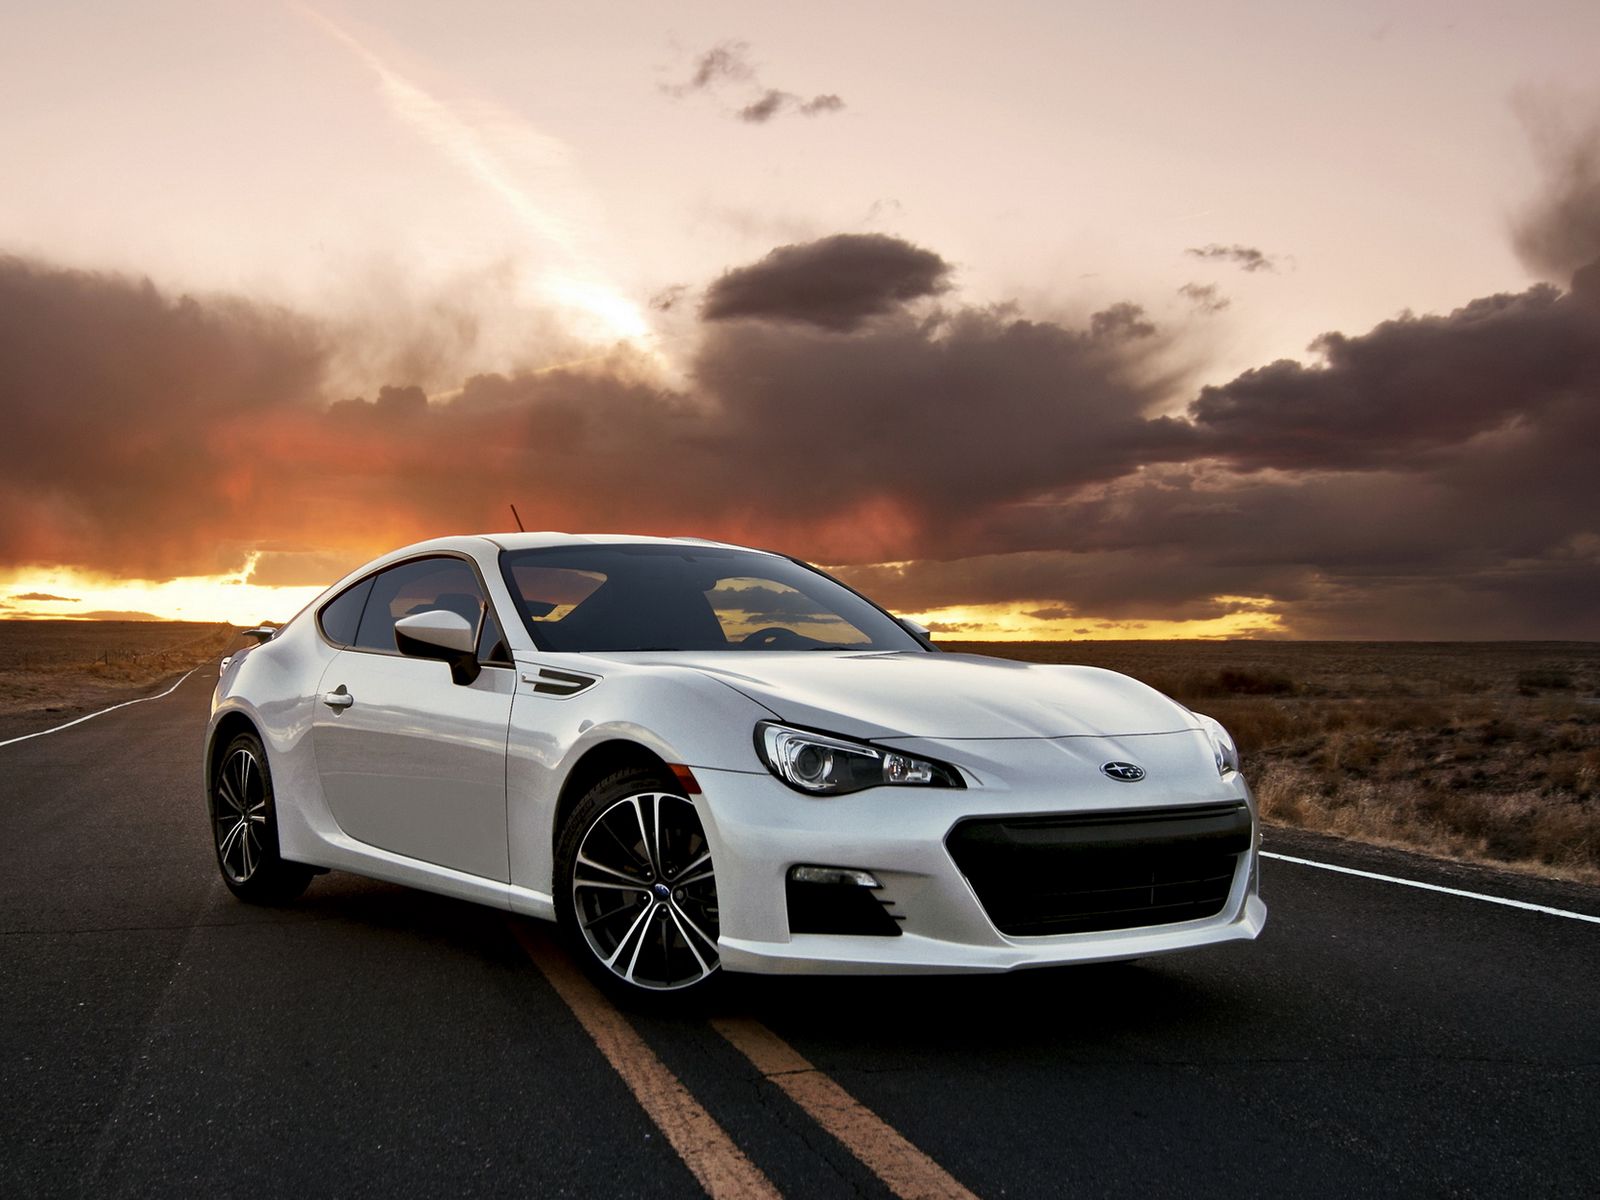 Download Subaru Brz wallpapers for mobile phone free Subaru Brz HD  pictures